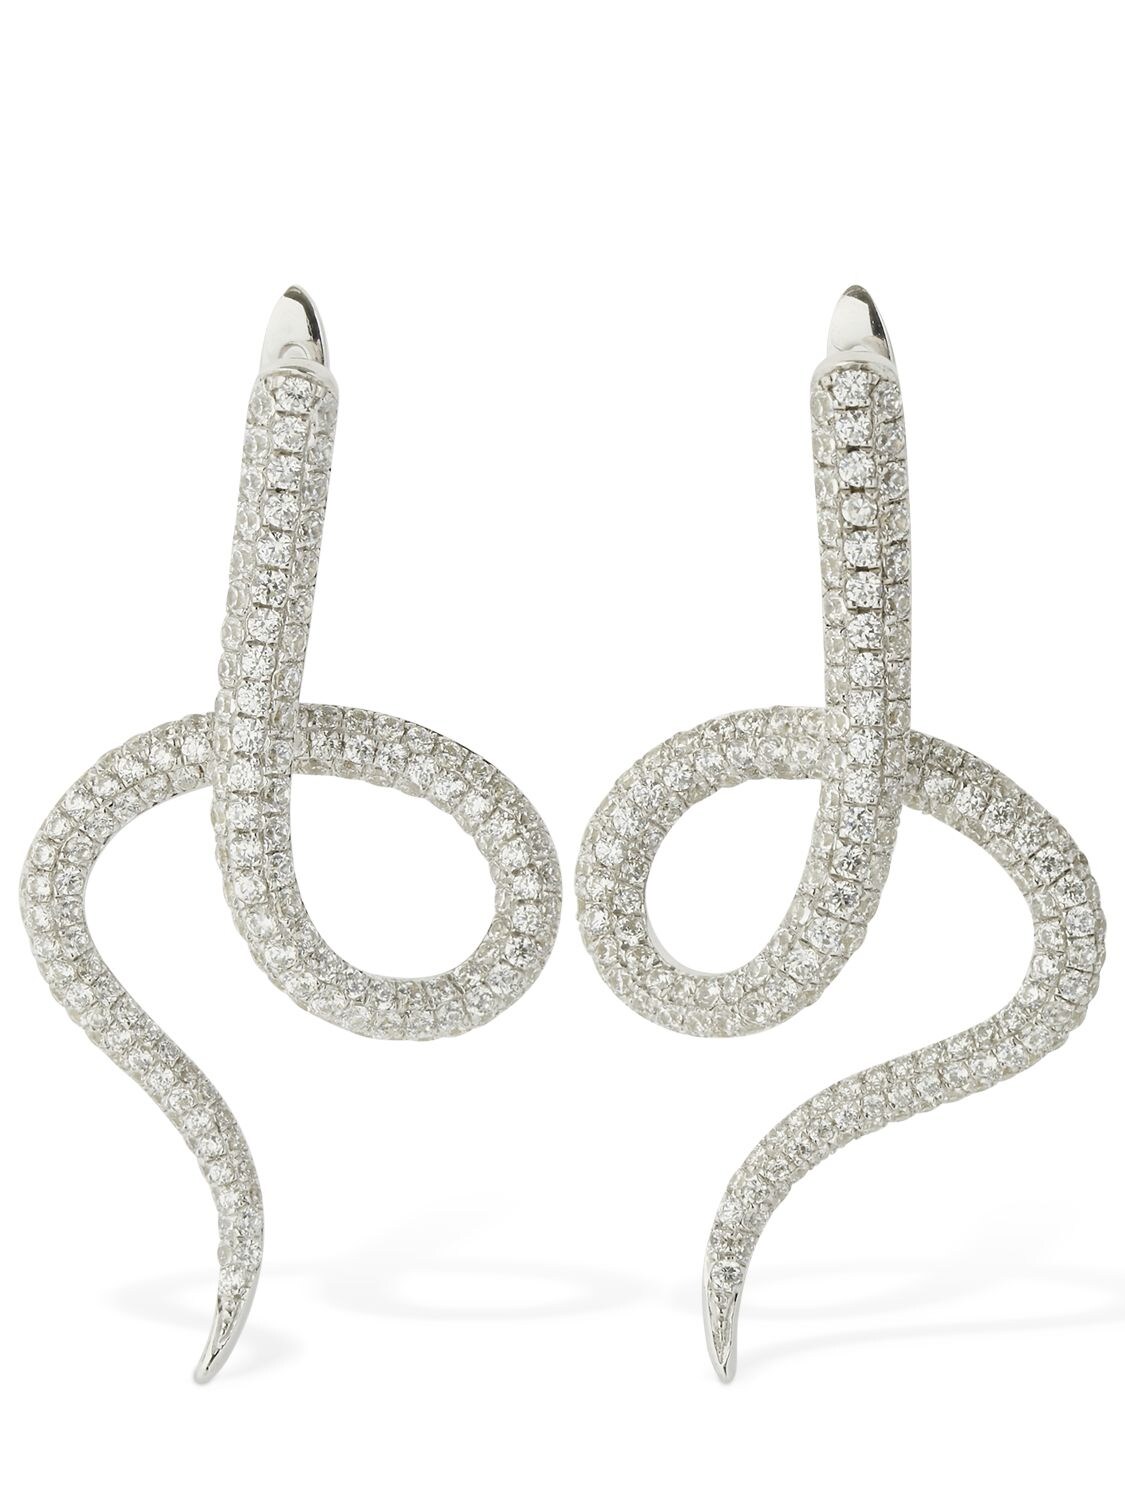 Anna Andres Iconic Crystal Earrings In Silver